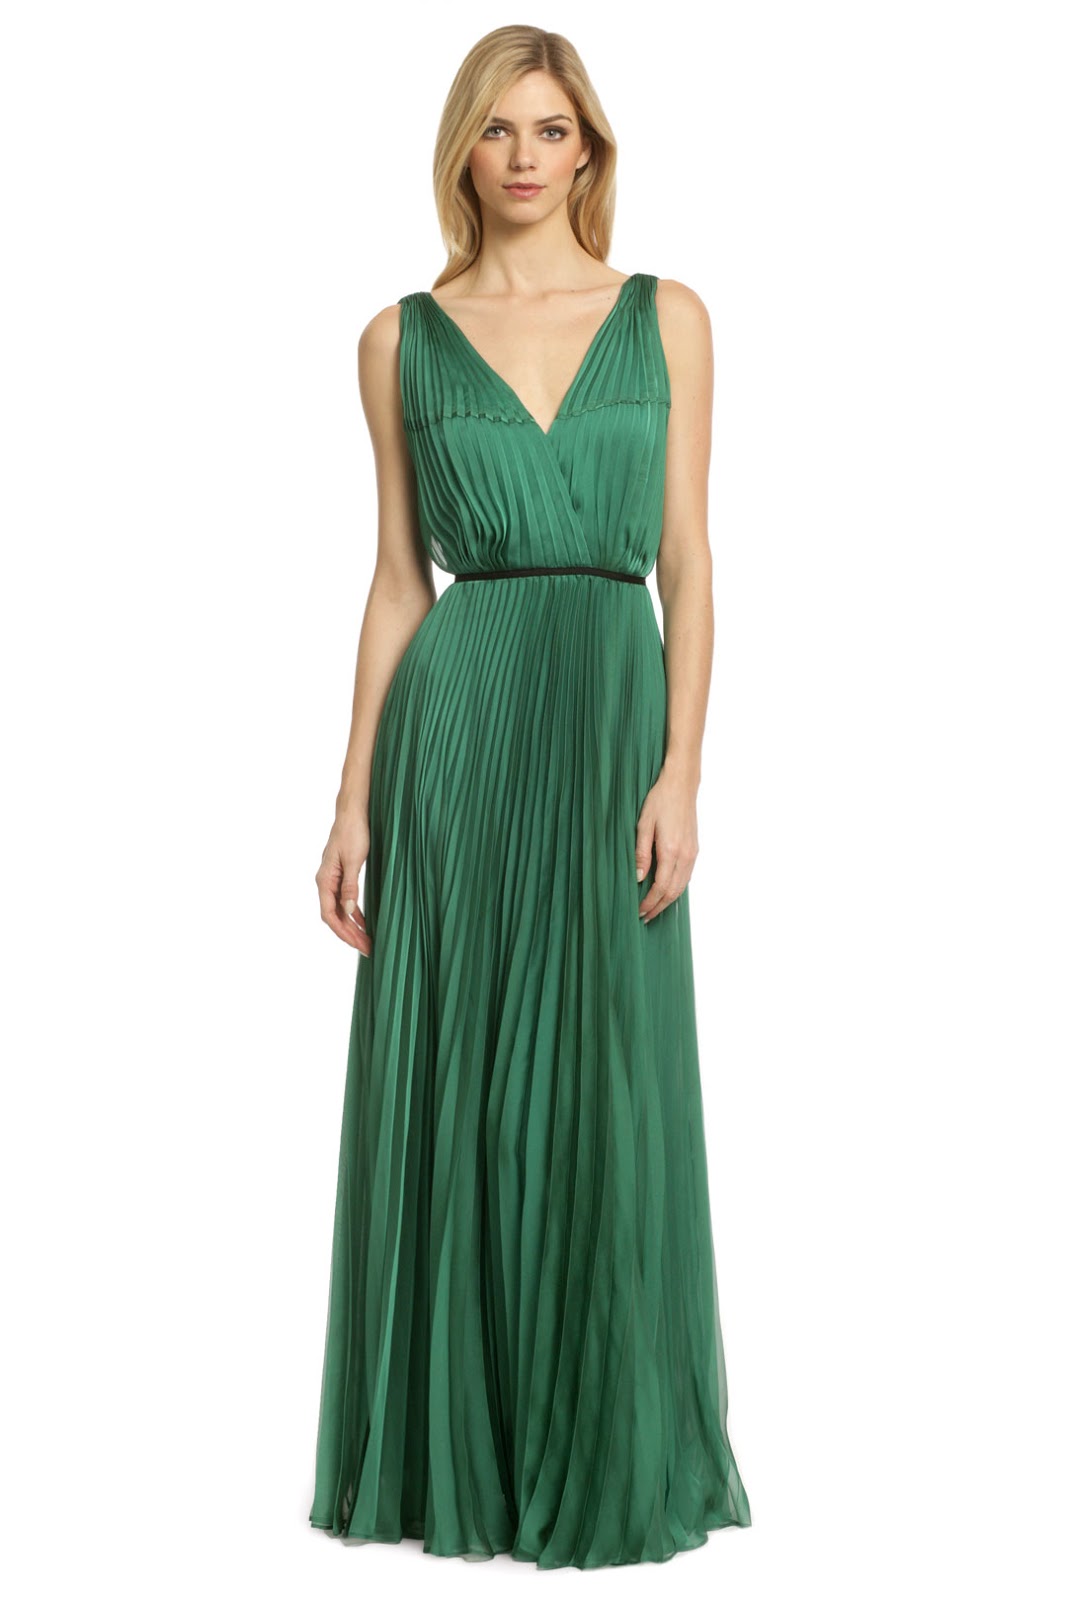 Halston Heritage Dresses Collection | Fashionate Trends